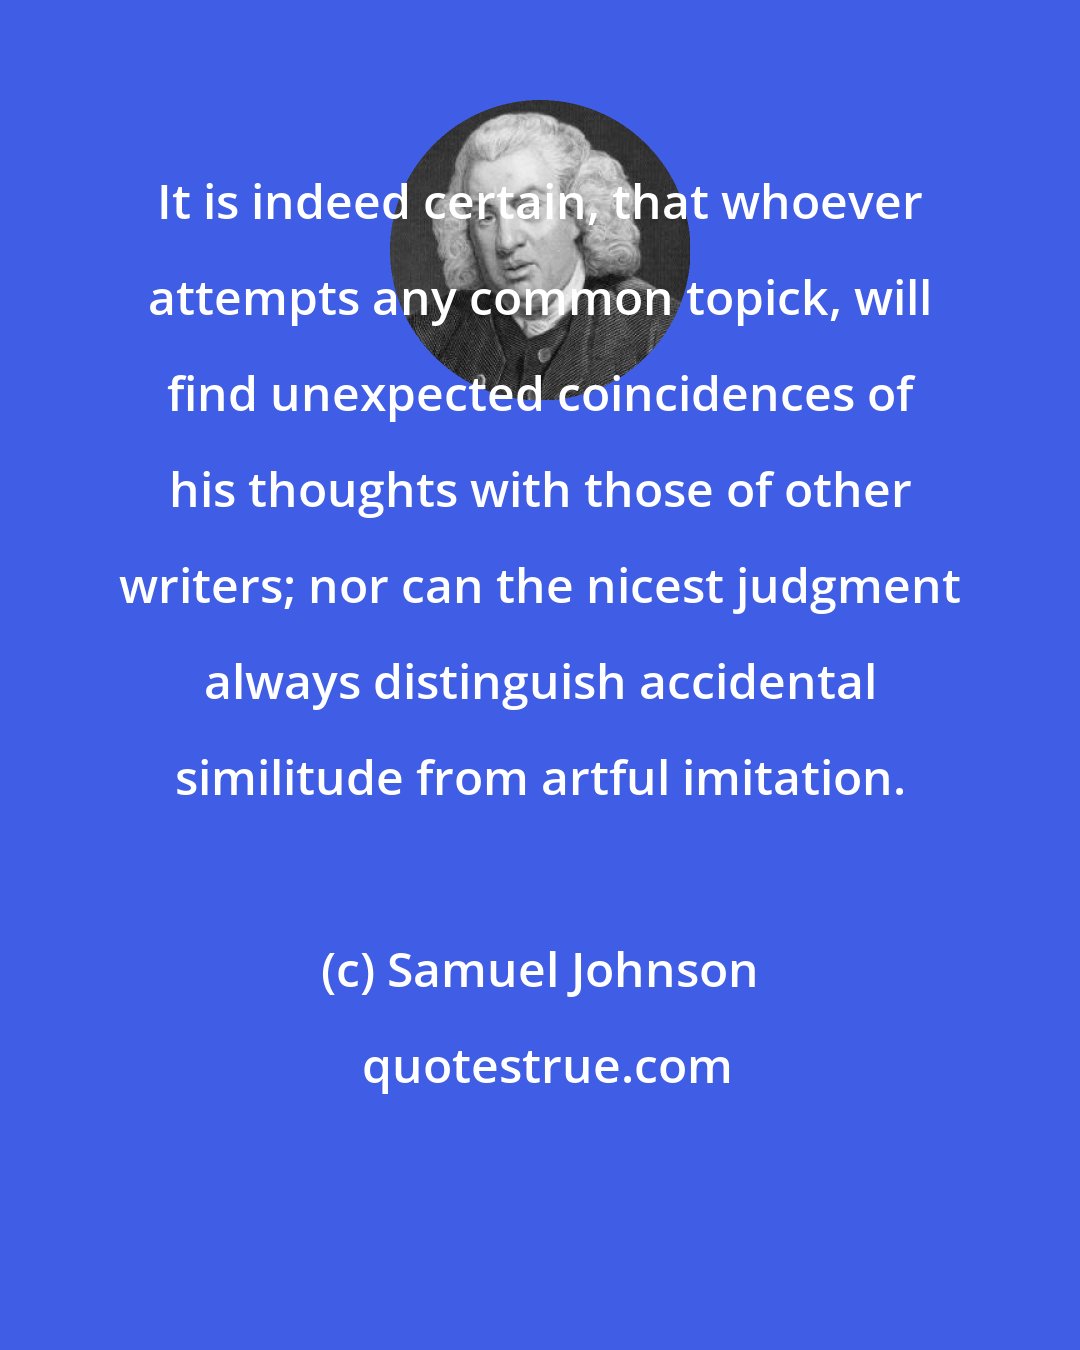 Samuel Johnson: It is indeed certain, that whoever attempts any common topick, will find unexpected coincidences of his thoughts with those of other writers; nor can the nicest judgment always distinguish accidental similitude from artful imitation.